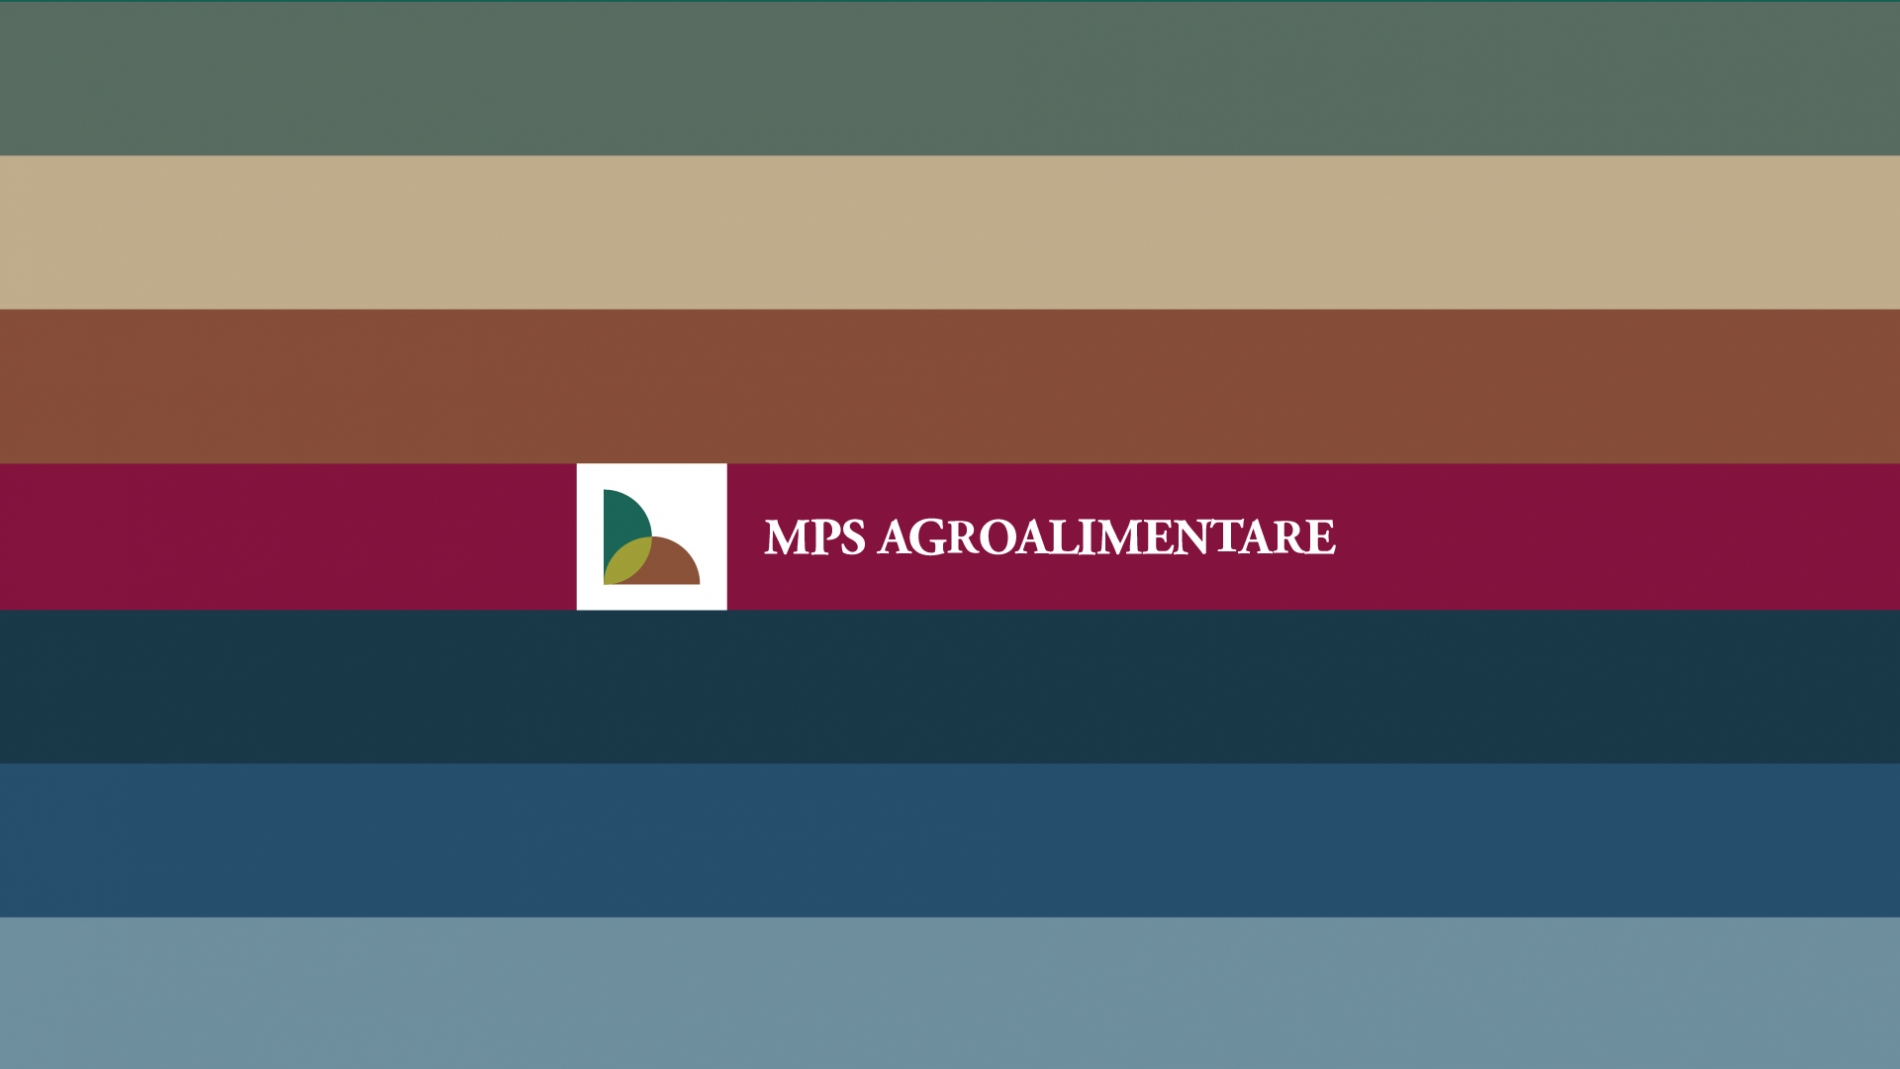 MPS Agroalimentare, enhancing local excellence